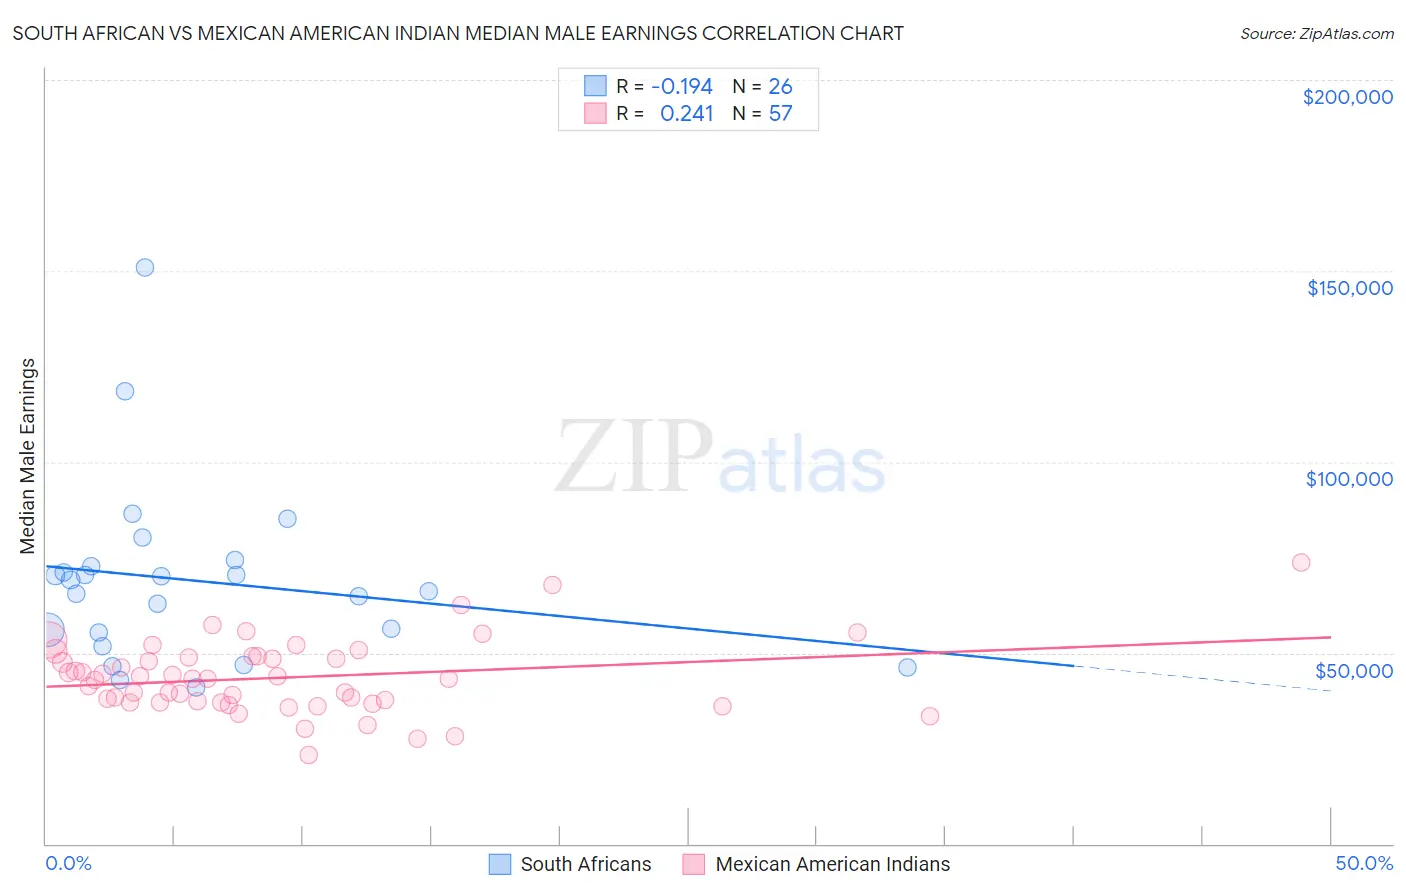 South African vs Mexican American Indian Median Male Earnings